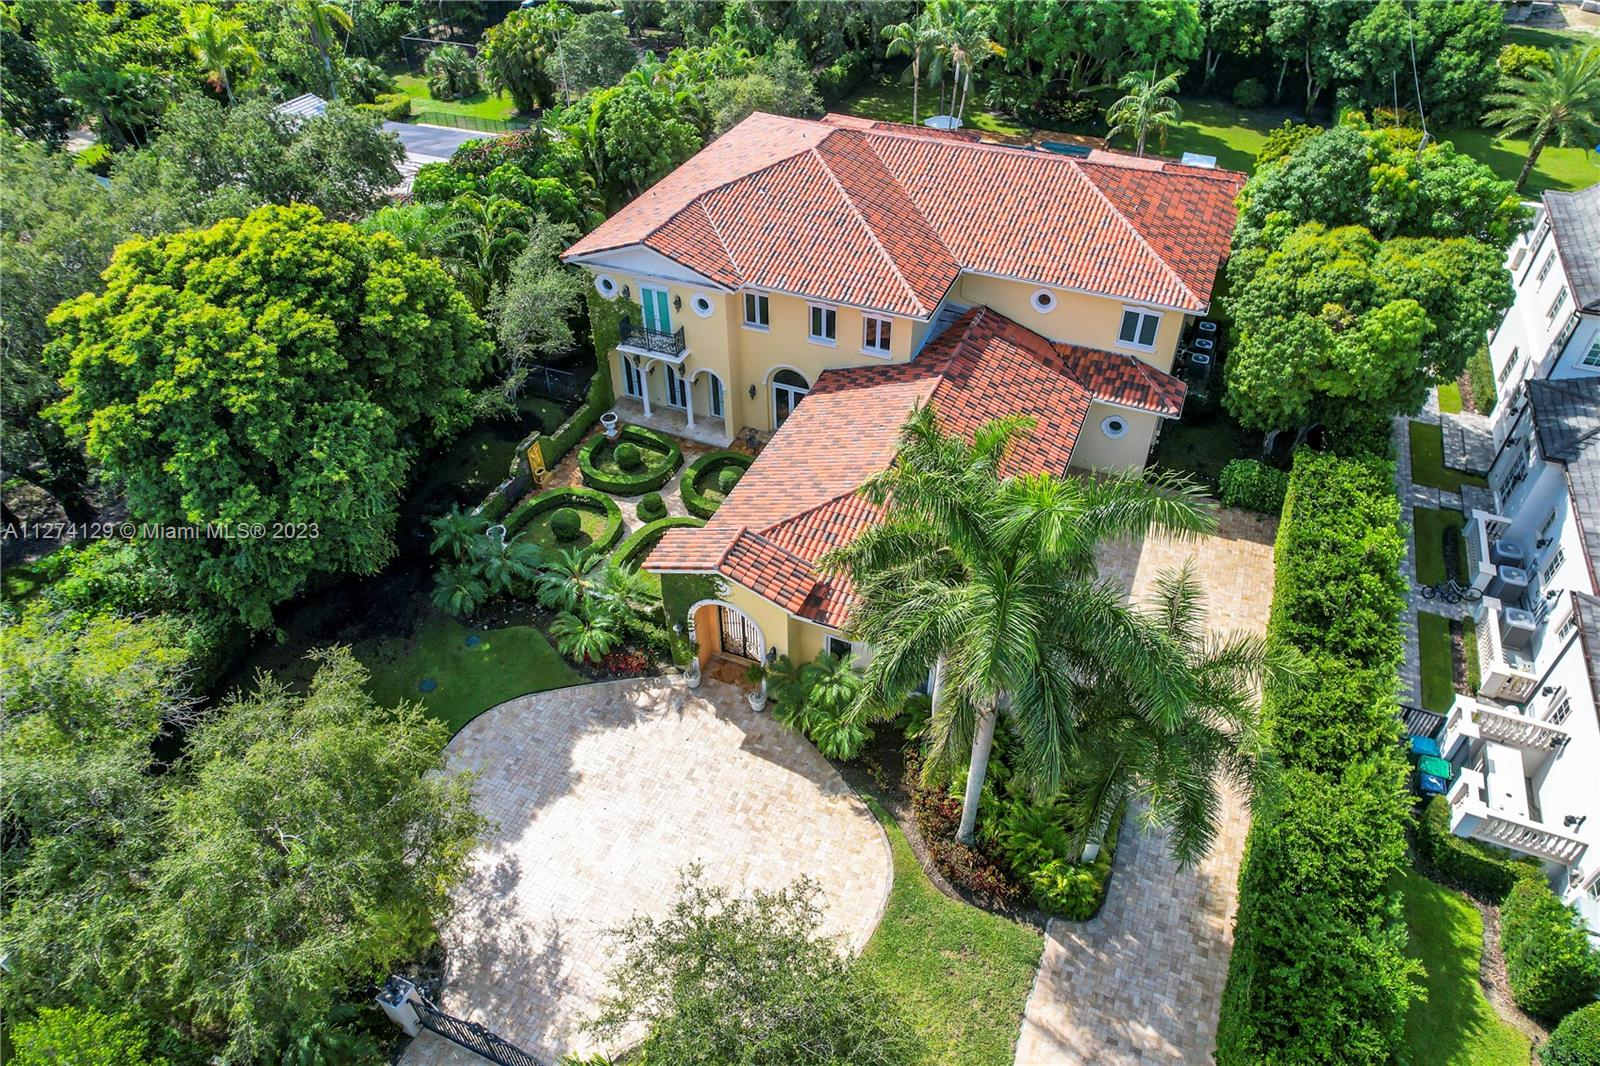 Experience first-class luxury & engulf yourself in the timeless elegance of Miami's Villa delle Fiabe. A home reminiscent of an Italian-style palazzo, located perfectly on a Cul-de-sac in North Pinecrest. Designed symmetrically to perfection with artisan inlaid marble floors, alabaster stone, wrought iron, & a foyer with soaring 30FT fresco ceilings. 7 bedrooms with en-suite baths, 2 half baths, grand dining room, Florida room, bar, & more. A chef's kitchen features SubZero, Thermador, & Dacor appliances. Your owner’s suite is the epitome of style--with a wet bar, sitting area, an enormous dressing room, massive walk-in closets, and a spa-style bathroom. 4-car garage & motor court. Topiary garden, 40-FT Roman style pool & spa. Your chance to live in a home that is a masterpiece of art.